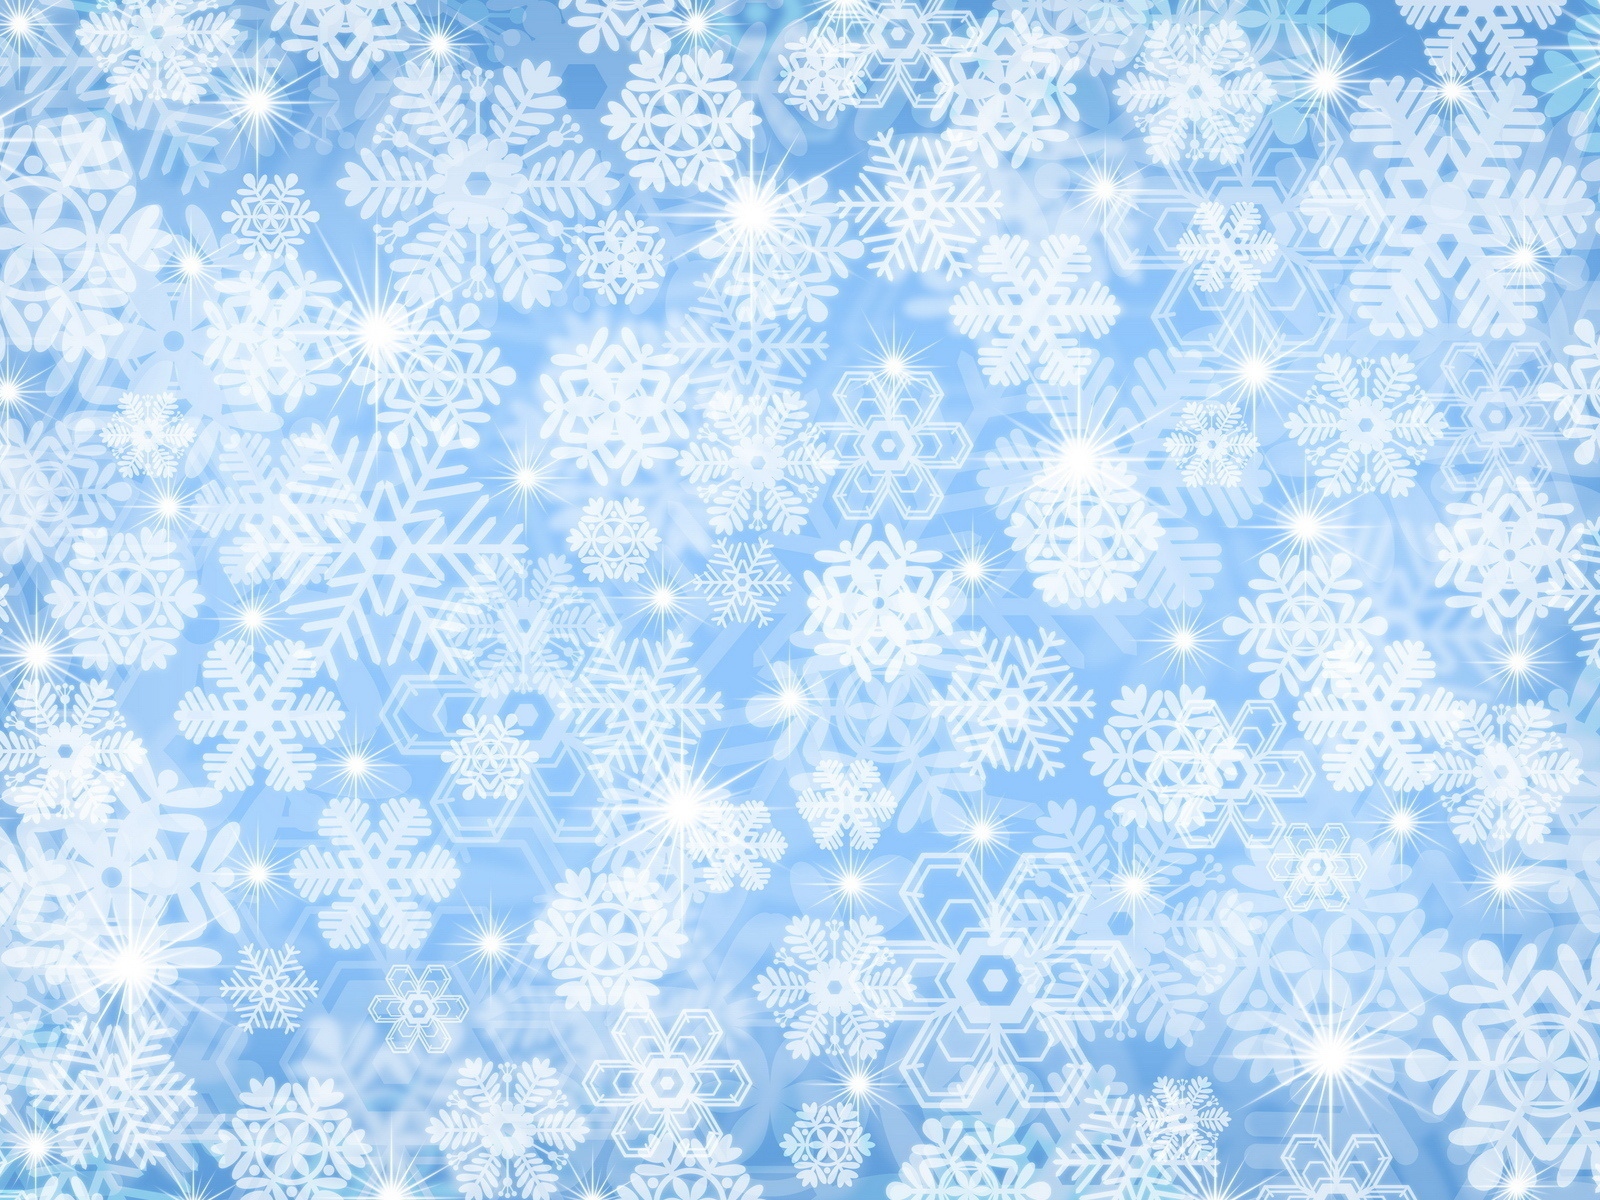 Gallery For Gt Snowflake Pattern Background